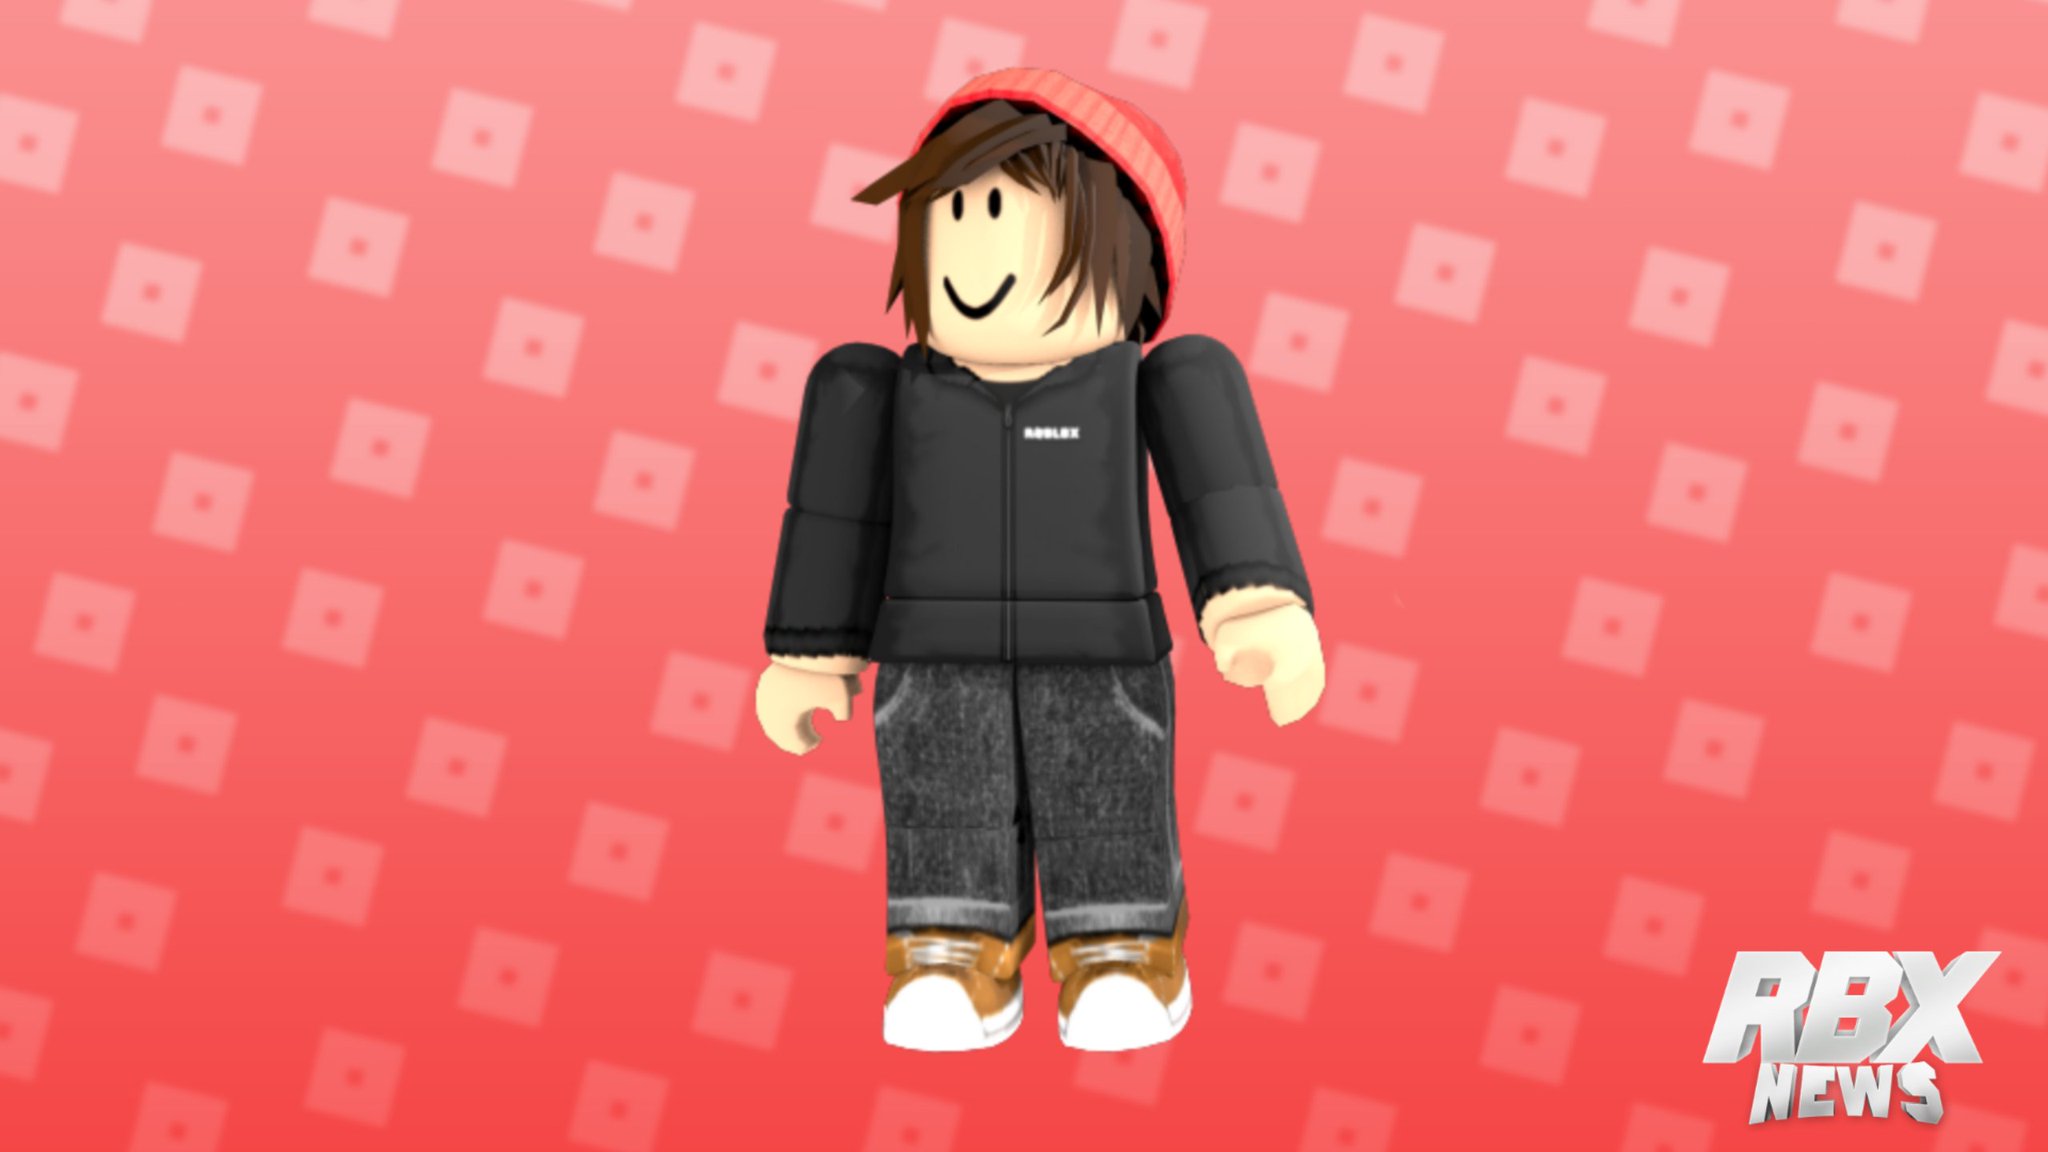 Rbxnews On Twitter It Seems Like Roblox Is Experimenting With New Body Sizes And Types You Can Claim The Skyler Bundle Free In The Avatar Shop Or Using This Link Https T Co Bttvmicqq1 - neo classic roblox